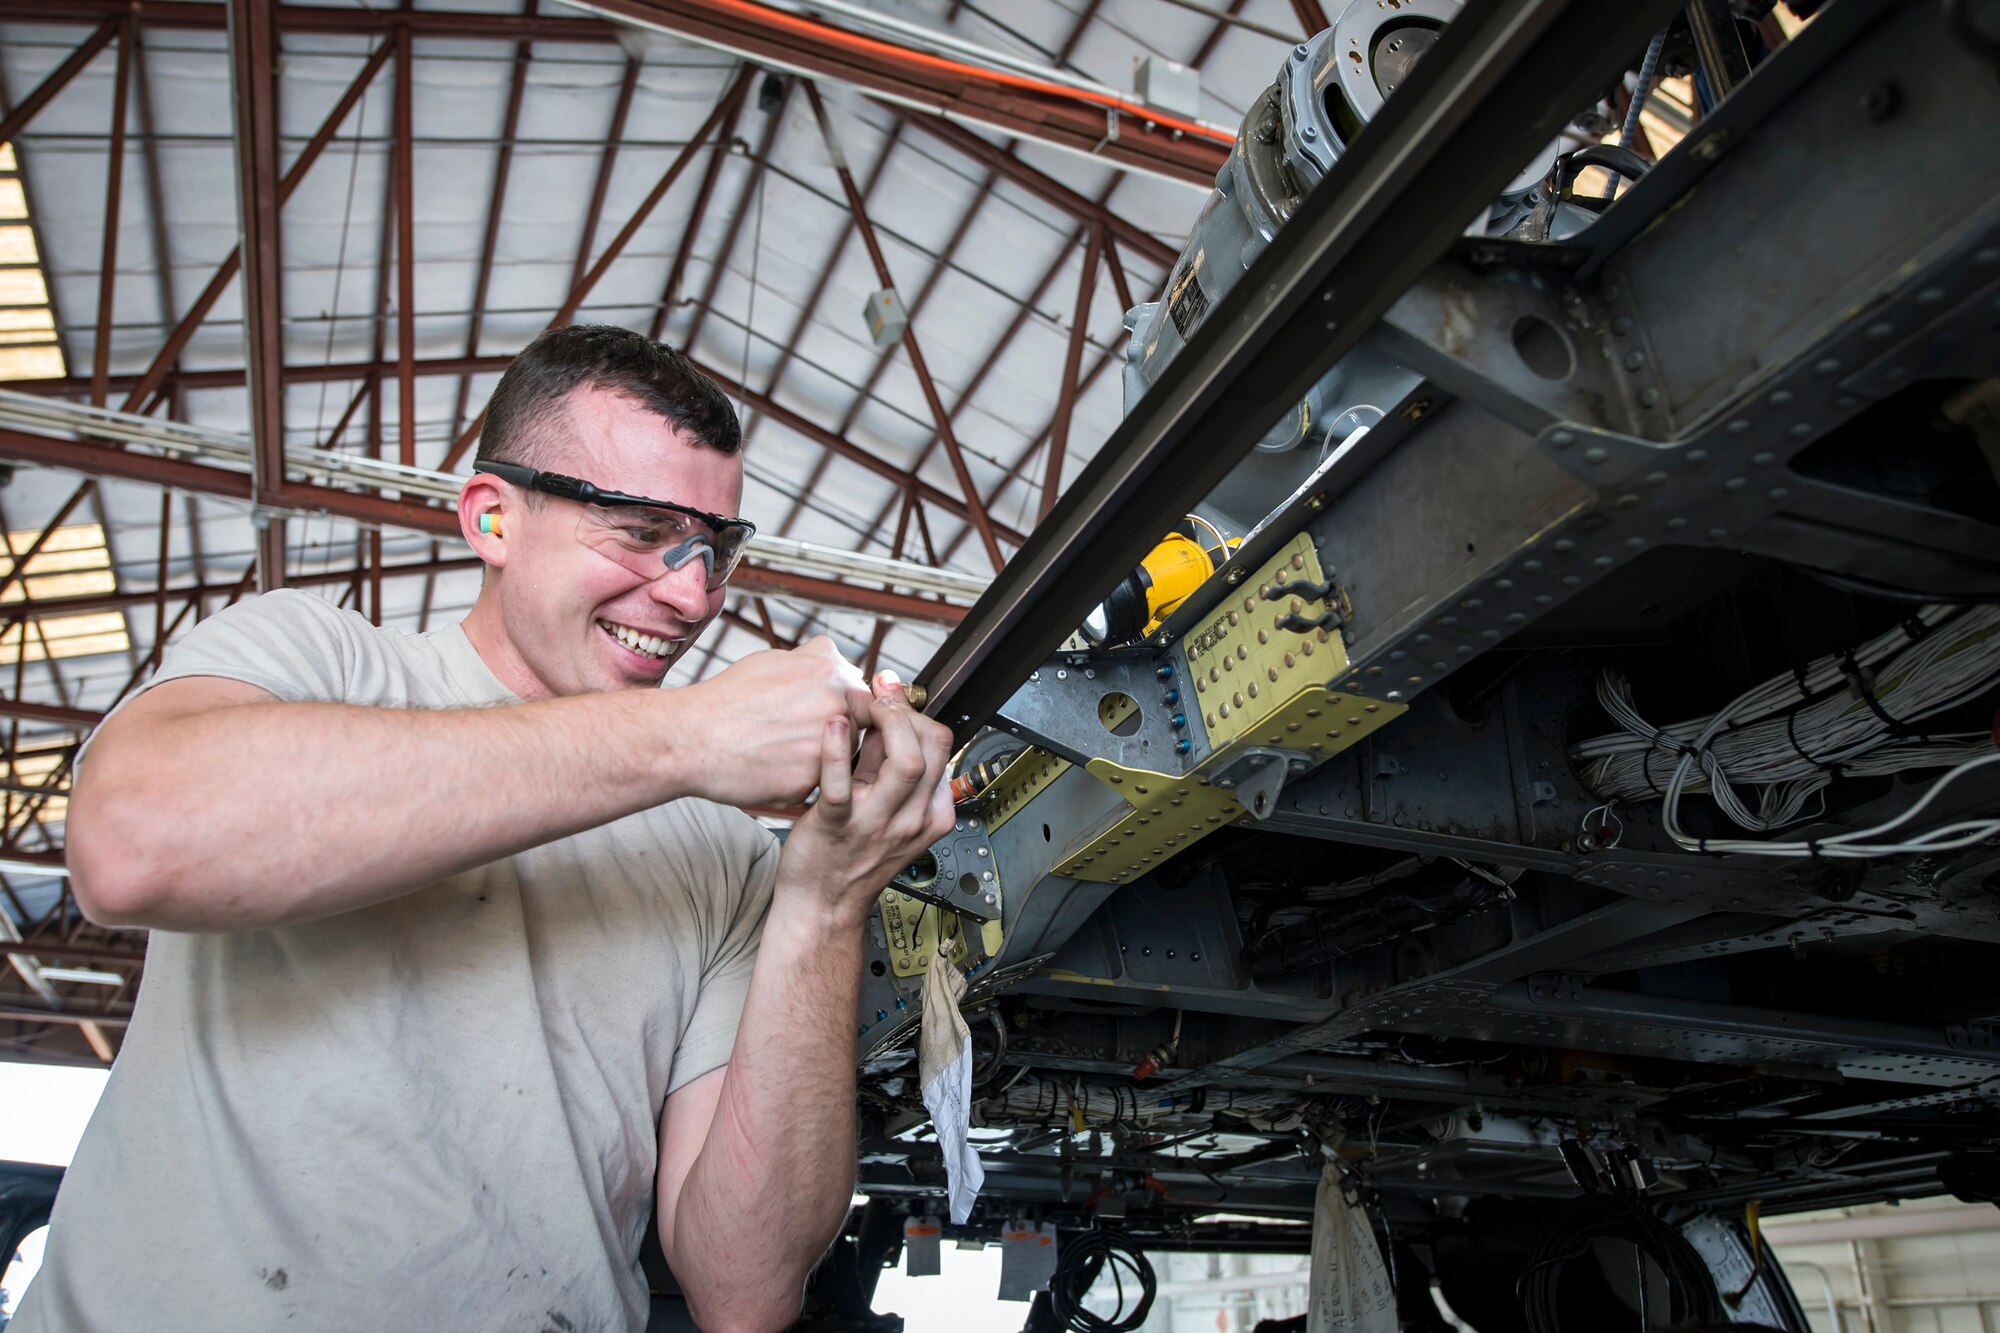 Senior Airman Reed Robitzsch, 723d Aircraft Maintenance (AMXS) Squadron aircraft structural maintenance journeyman, installs the railing on an HH-60G Pave Hawk, May 10, 2018, at Moody Air Force Base, Ga.  Airmen from the 723d AMXS along with machinists from the Corpus Christi Army Depot conducted a full-structural tear down and restoration on an HH-60G Pave Hawk. Once the aircraft was torn down, Airmen and the machinists performed repairs on all of its components prior to resembling it. (U.S. Air Force photo by Airman 1st Class Eugene Oliver)